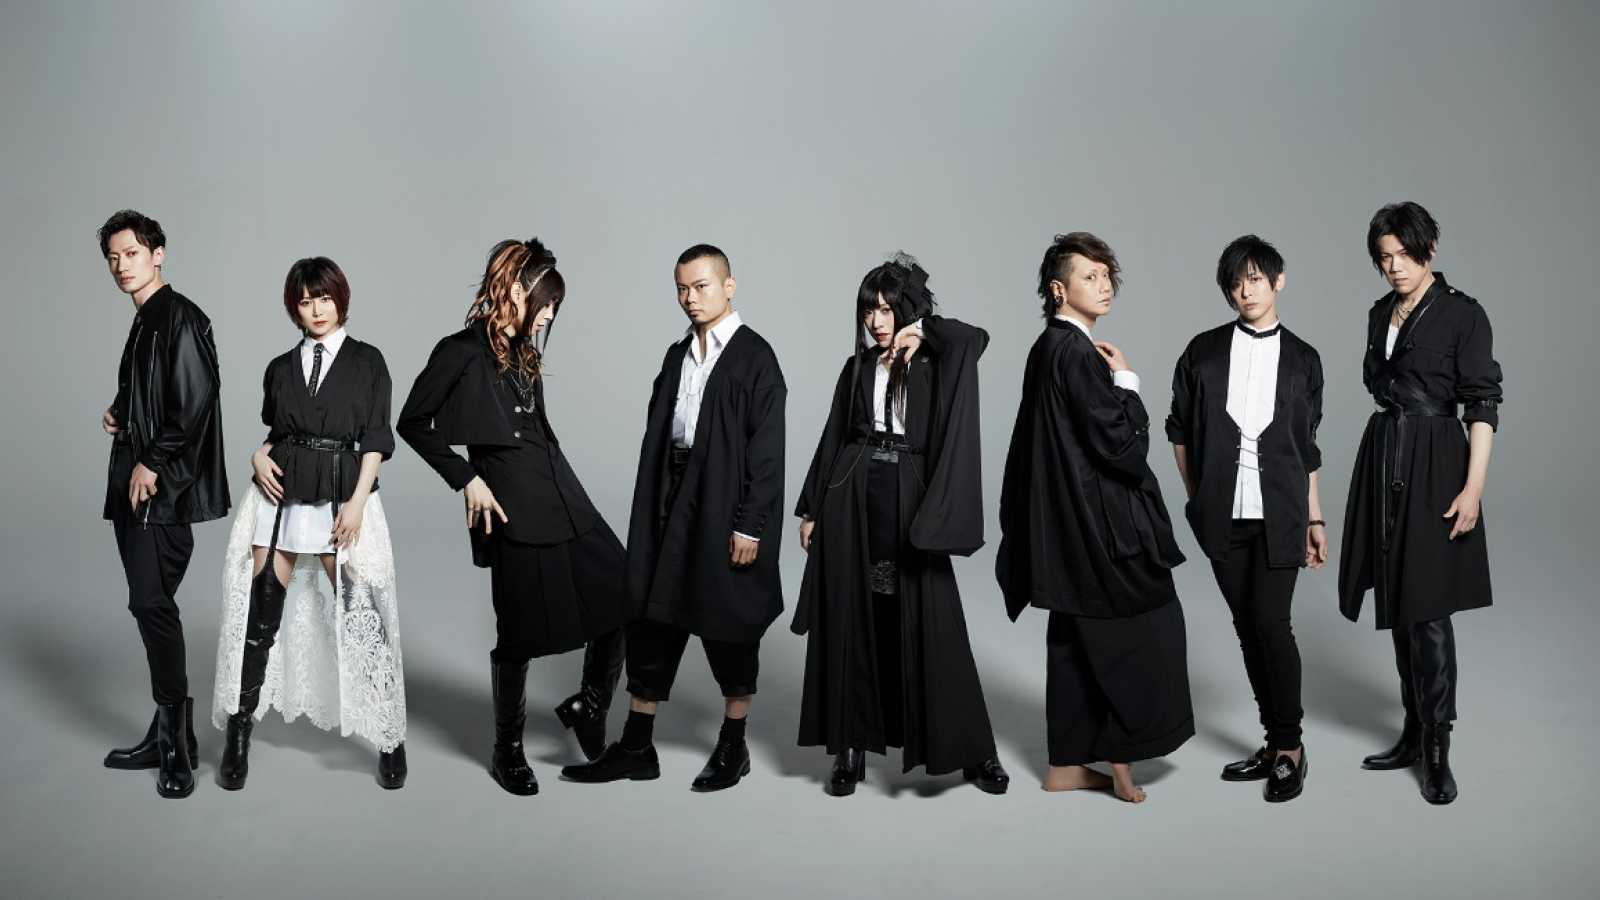 WagakkiBand ©  IGNITE MANAGEMENT Corp. All rights reserved.